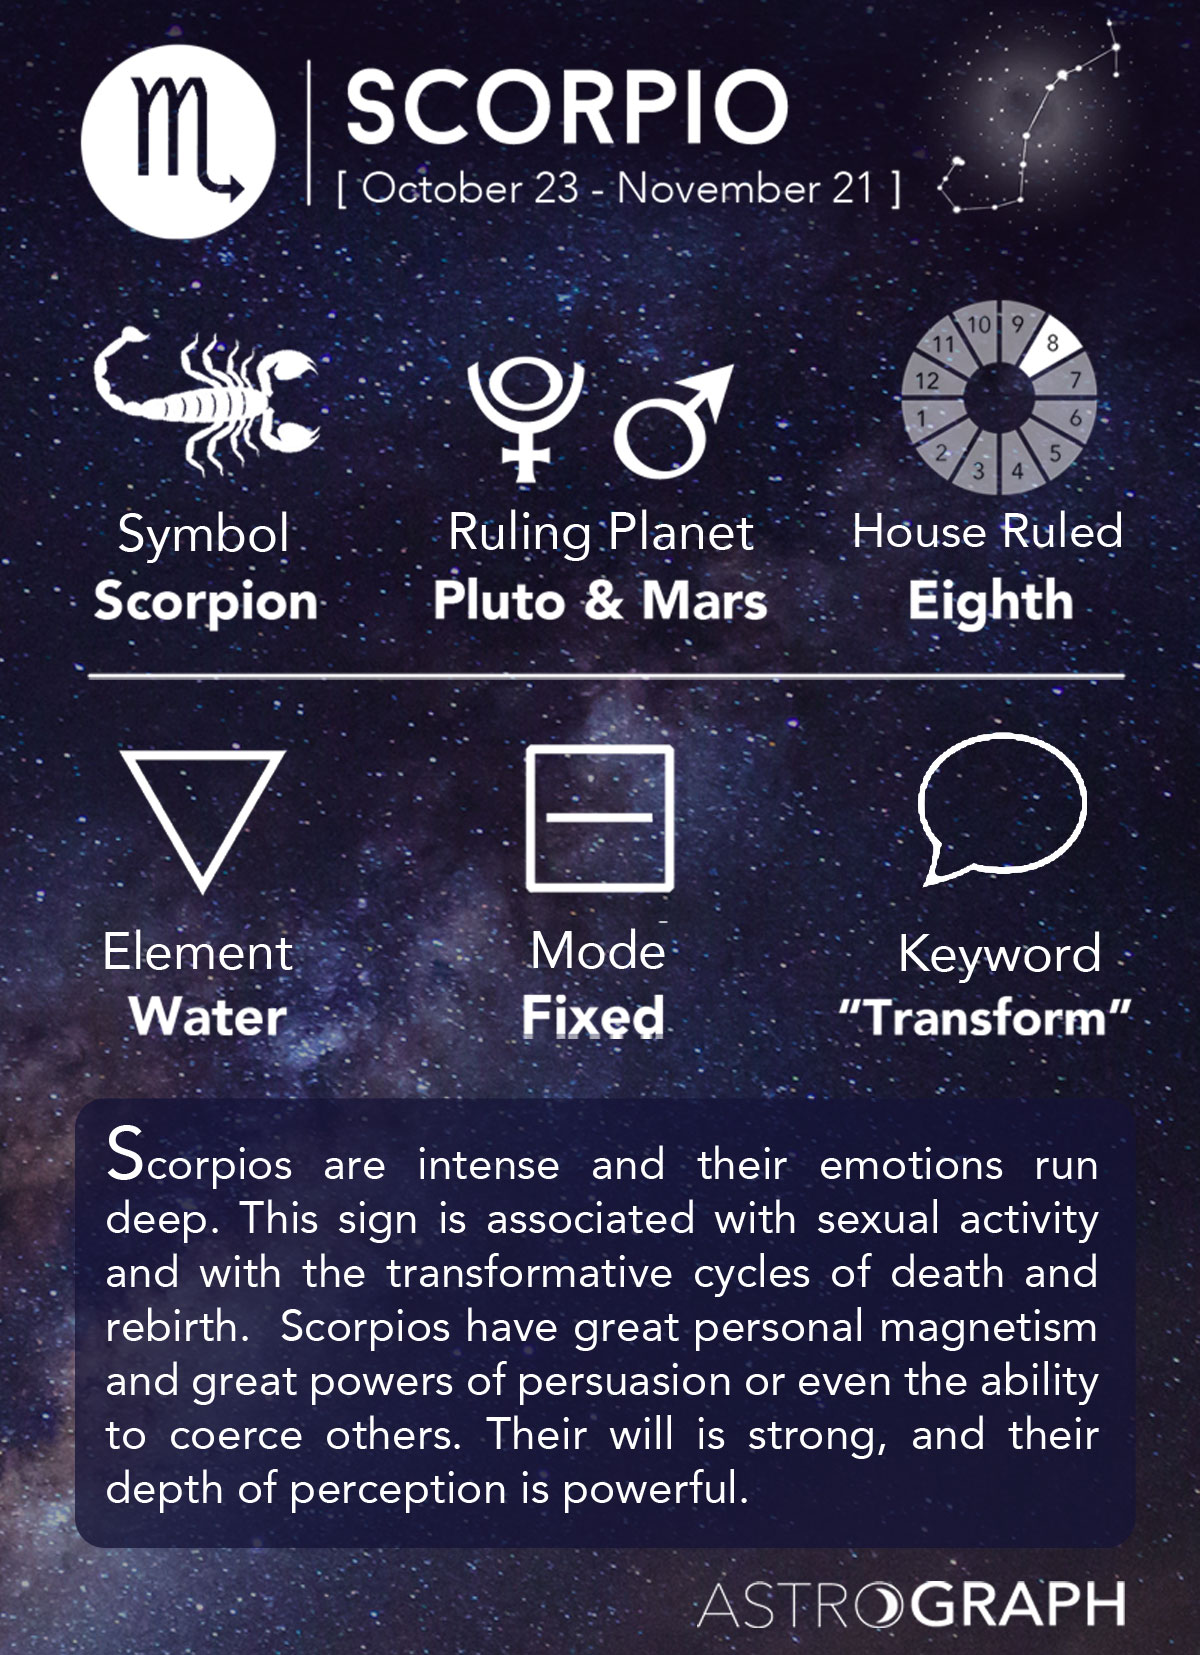 What is Scorpios type?